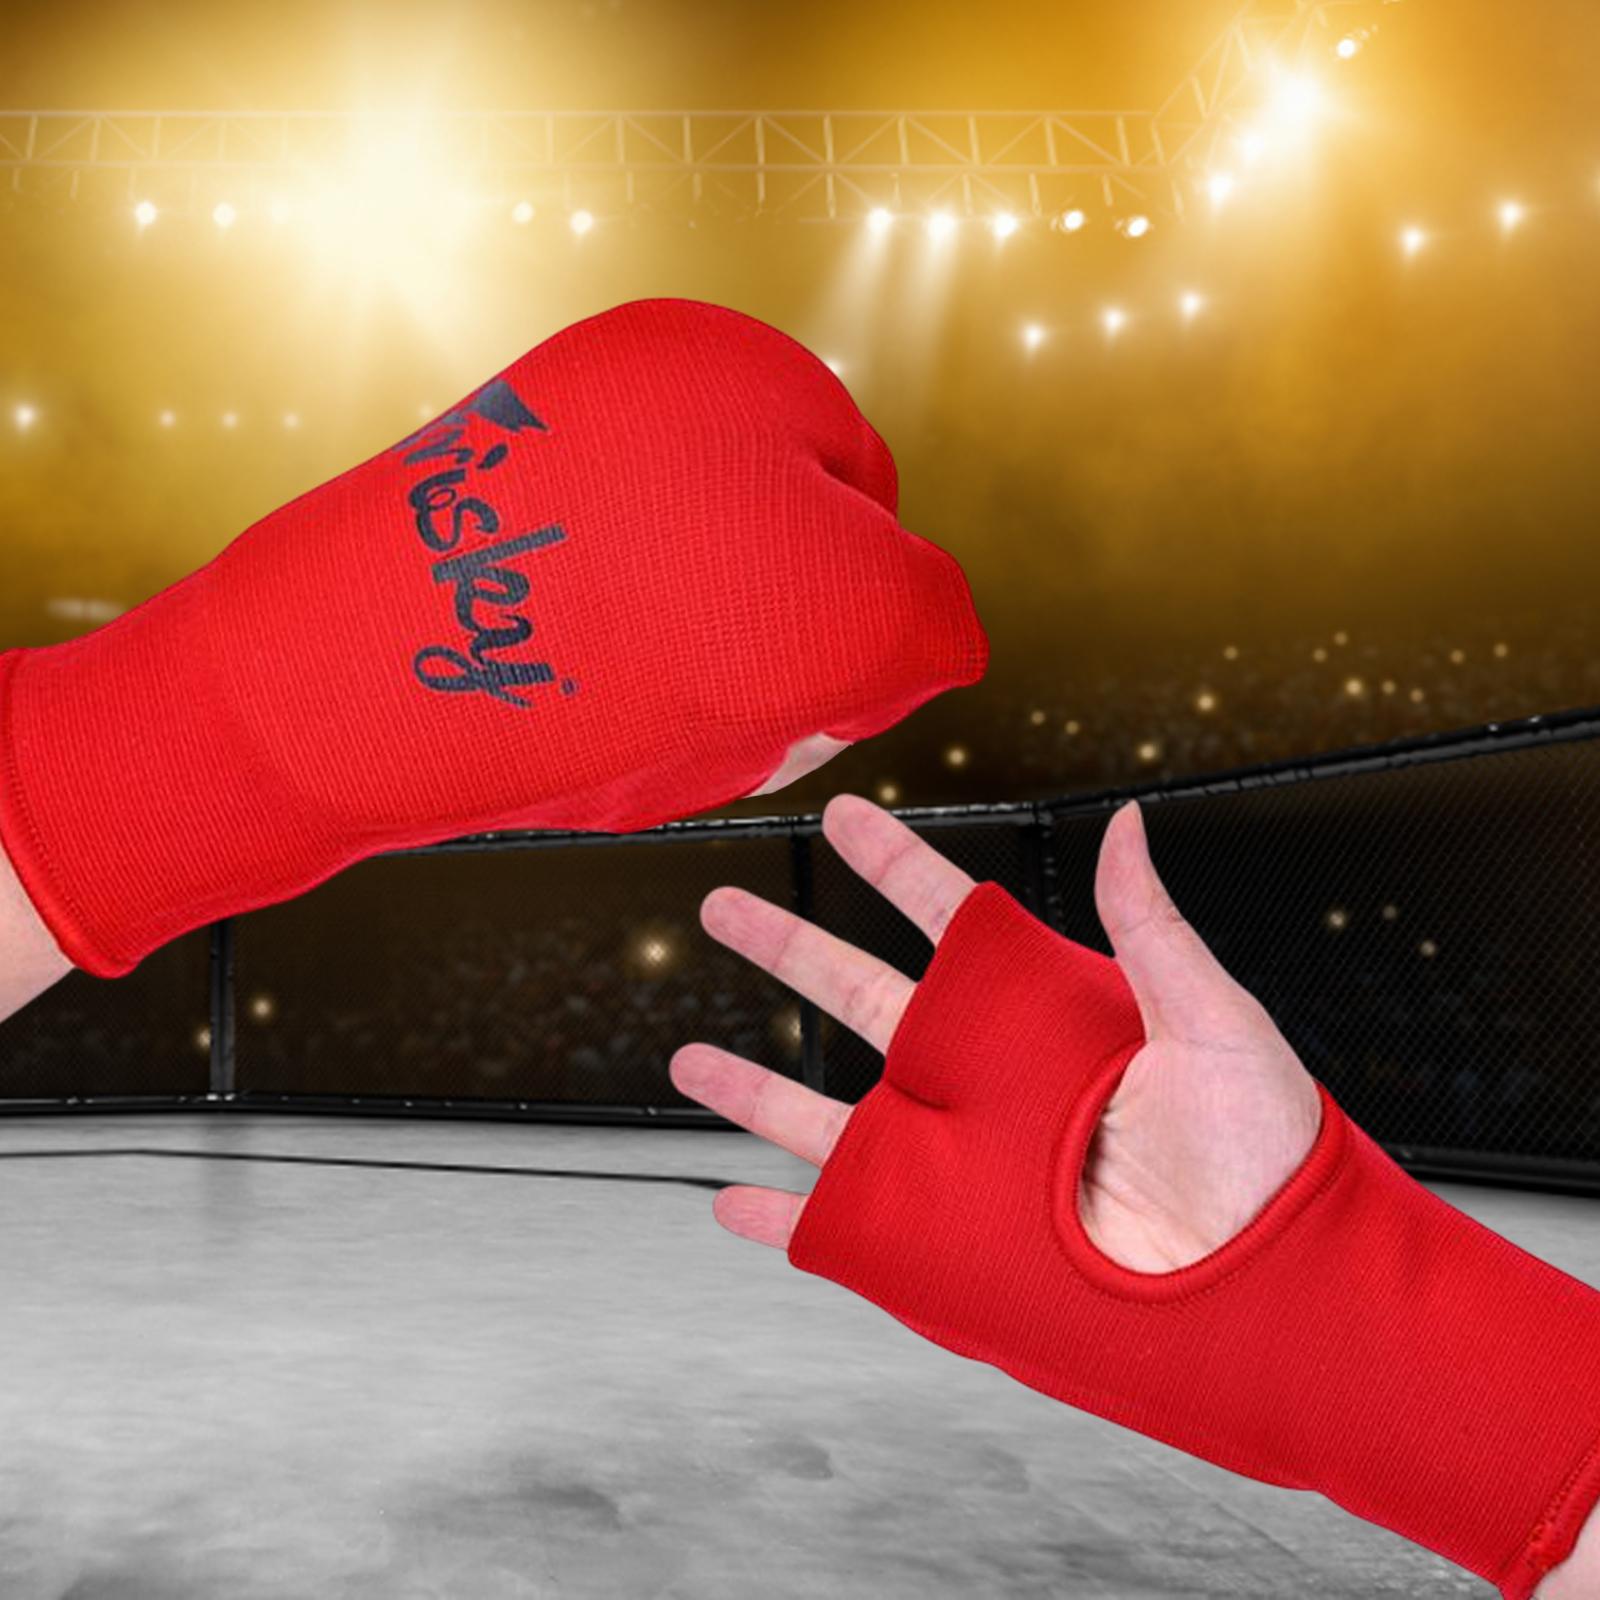 Elastic Hand Wraps Comfortable Inner Gloves for Boxing for Martial Arts Red Medium